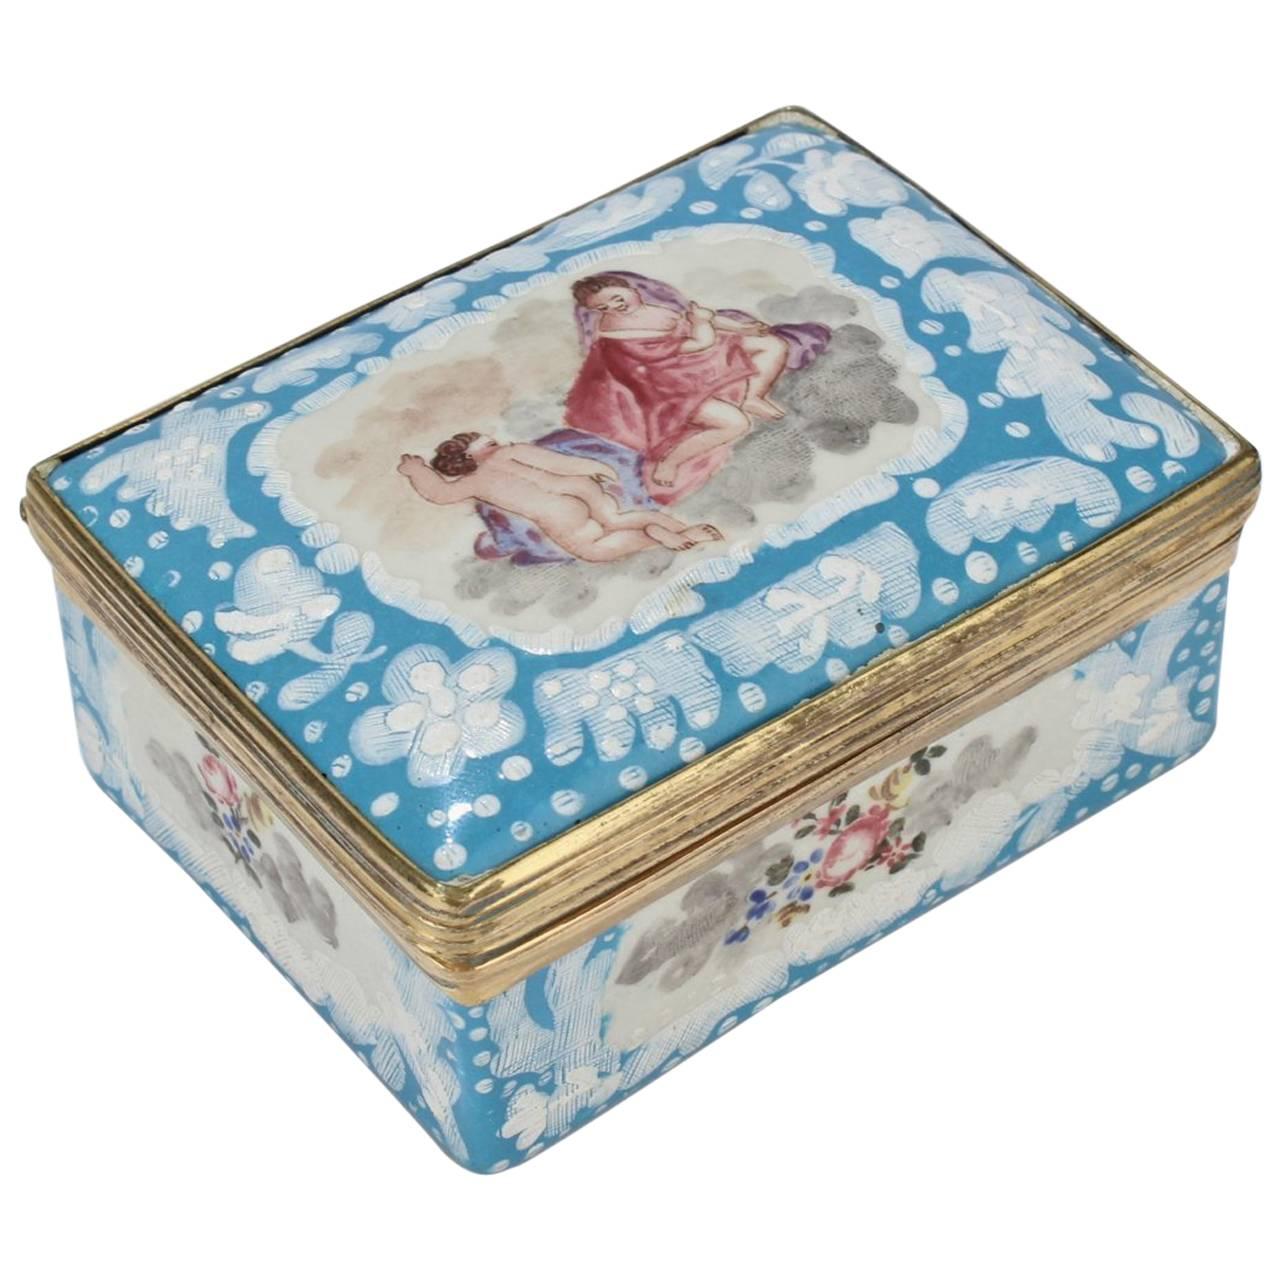 Antique English Battersea Bilston Table Snuff Box with Cherubs, Lady and a Dog